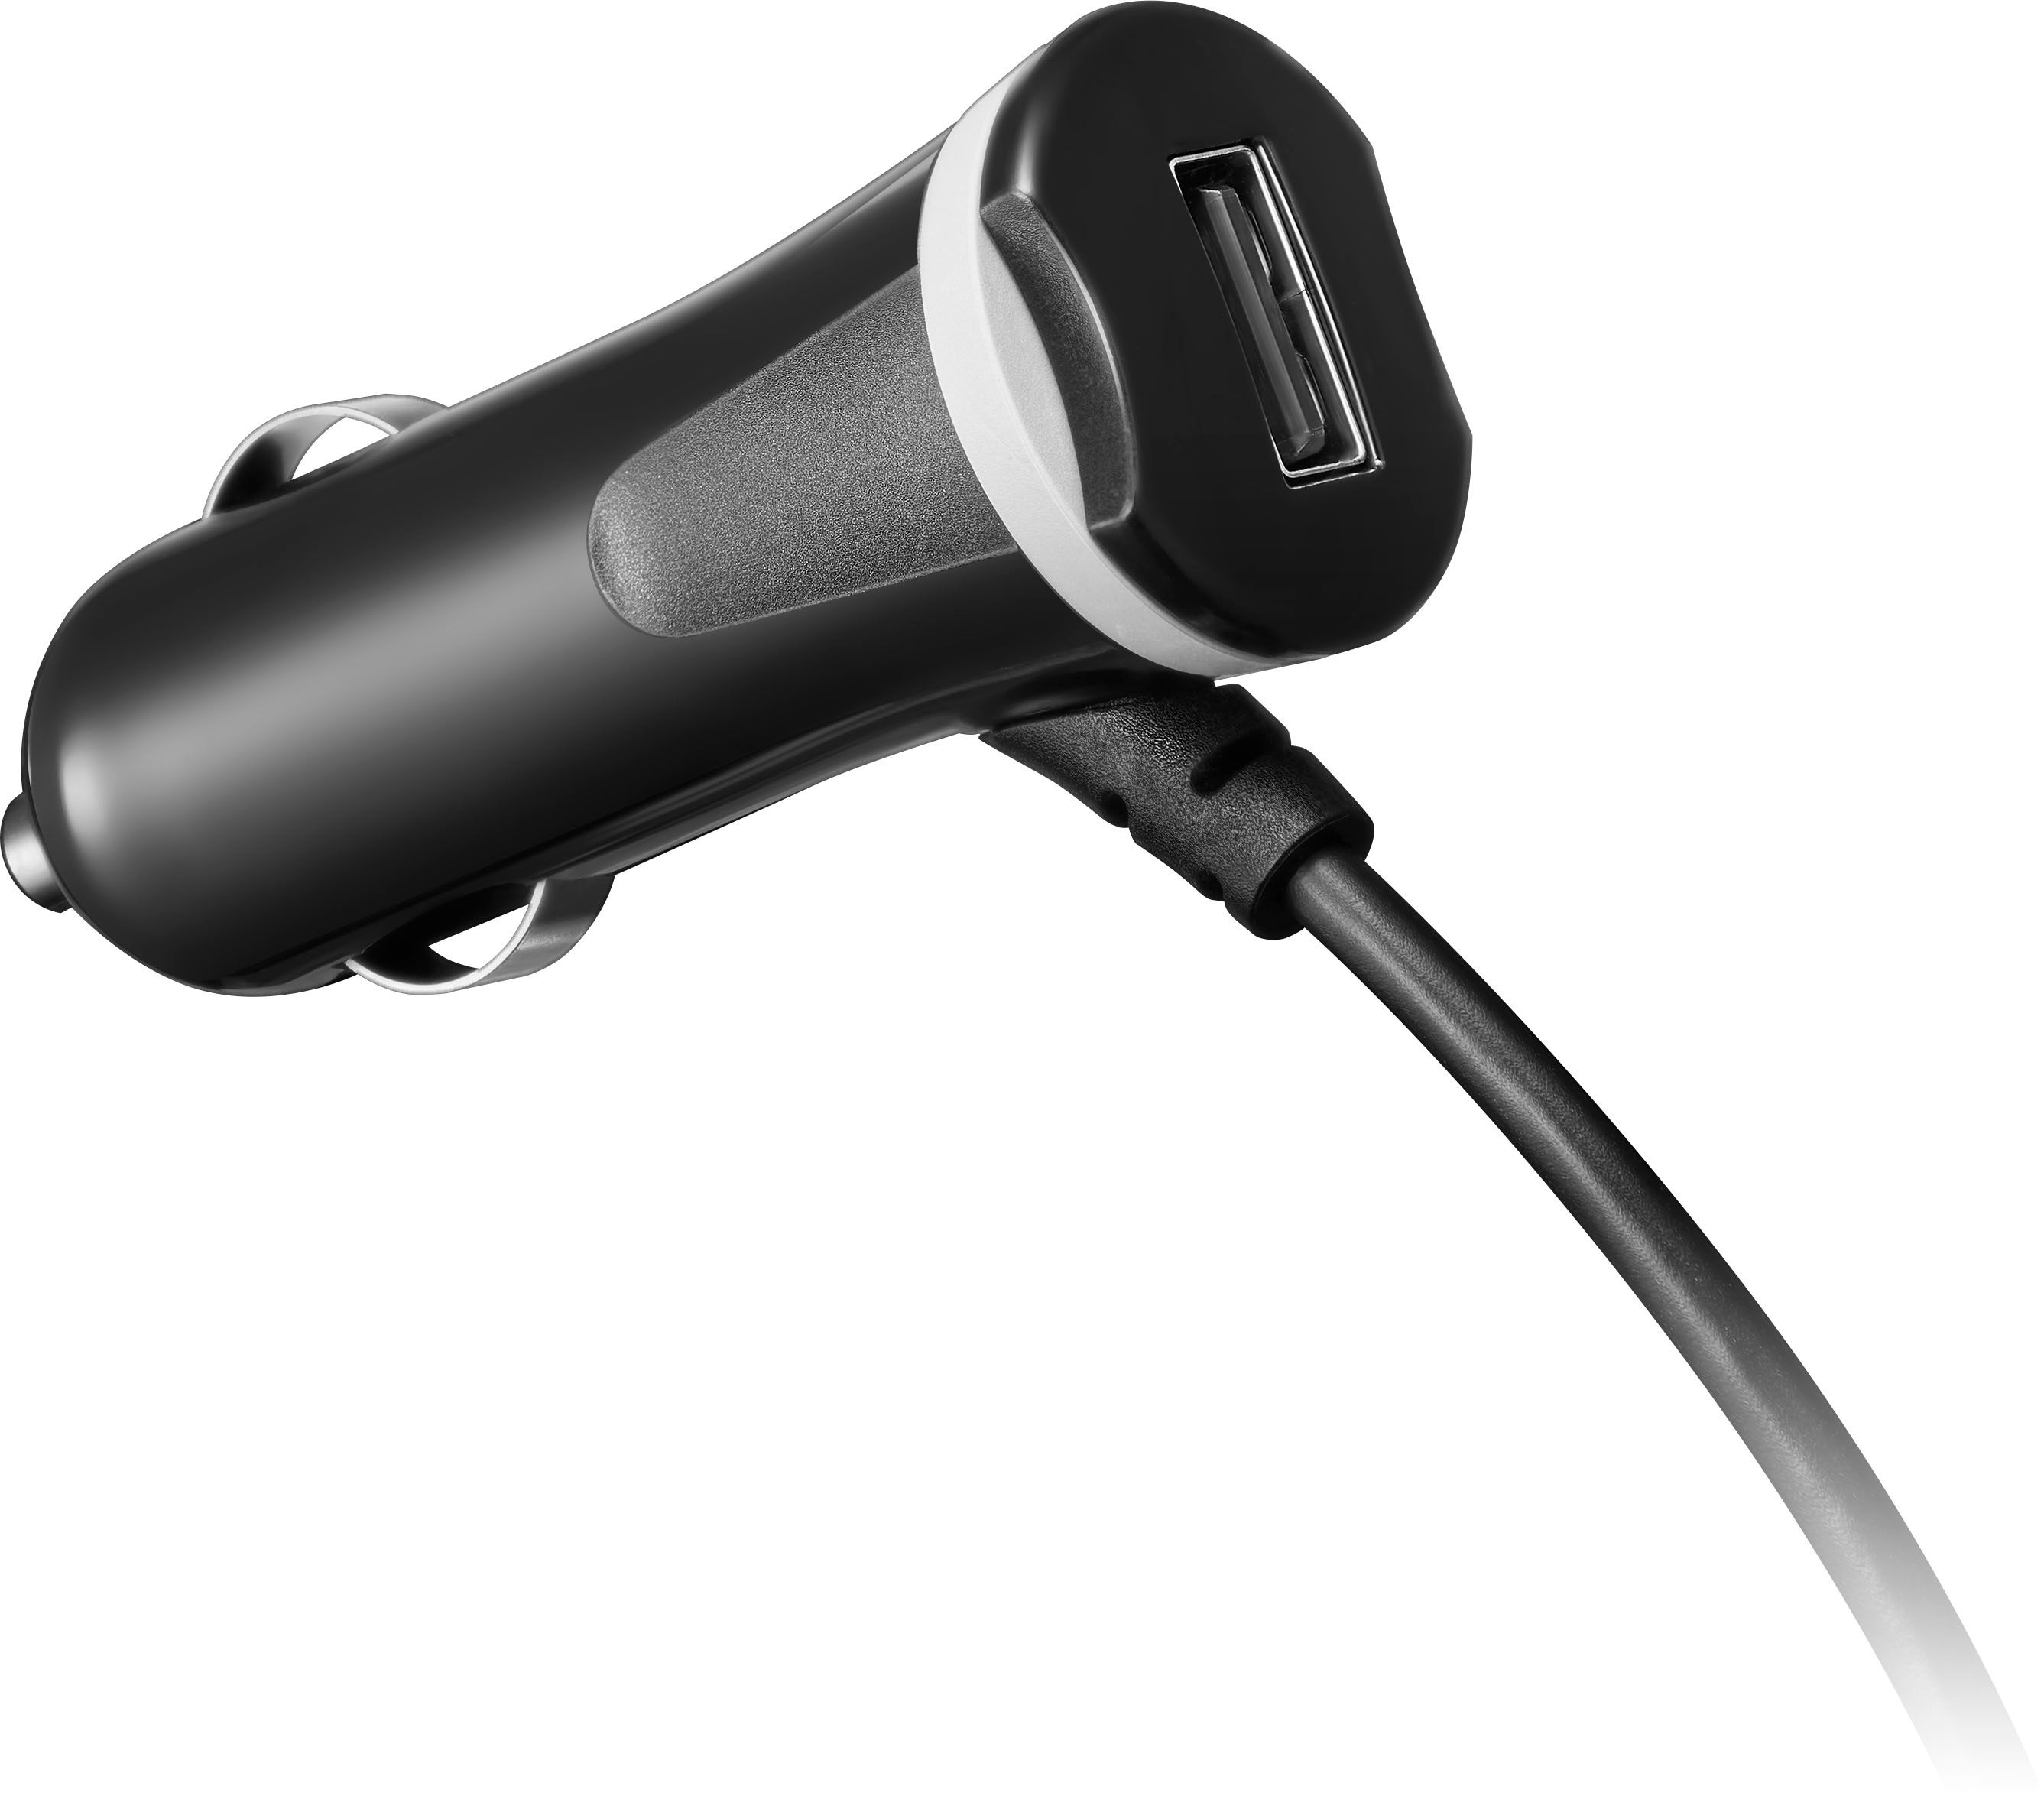 Insignia 25W Lightning Vehicle Charger with 1 USB Port - Black - 9 ft